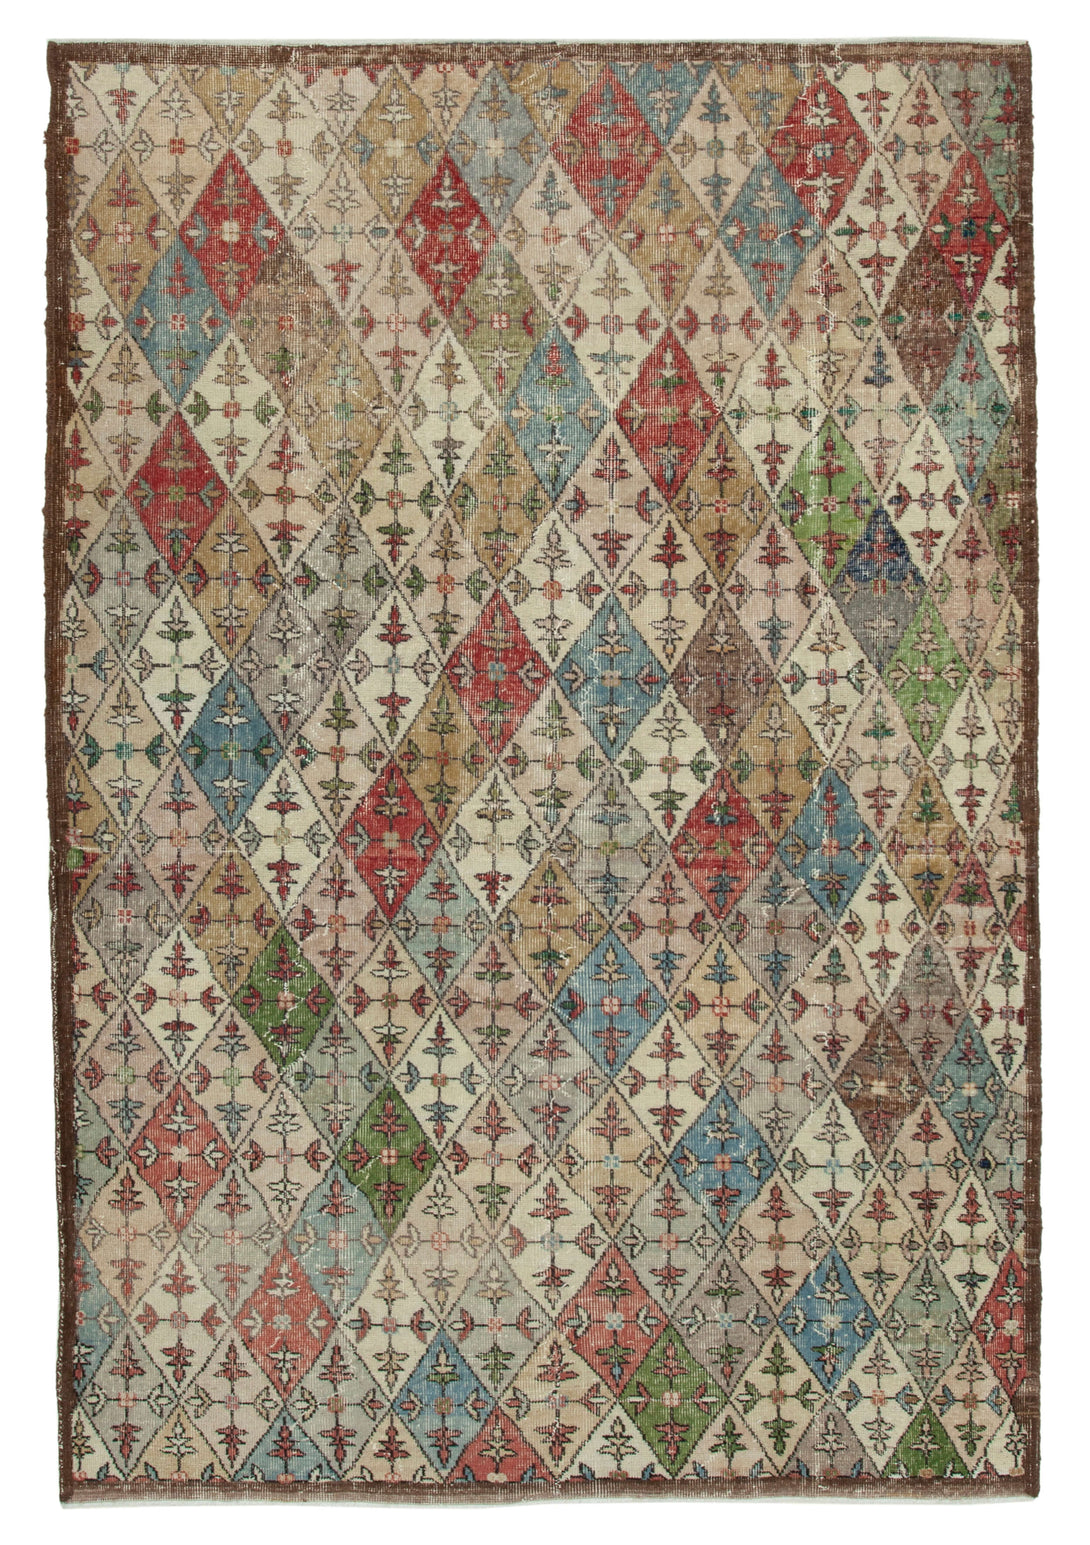 Handmade Geometric Area Rug > Design# OL-AC-33215 > Size: 6'-0" x 8'-10", Carpet Culture Rugs, Handmade Rugs, NYC Rugs, New Rugs, Shop Rugs, Rug Store, Outlet Rugs, SoHo Rugs, Rugs in USA